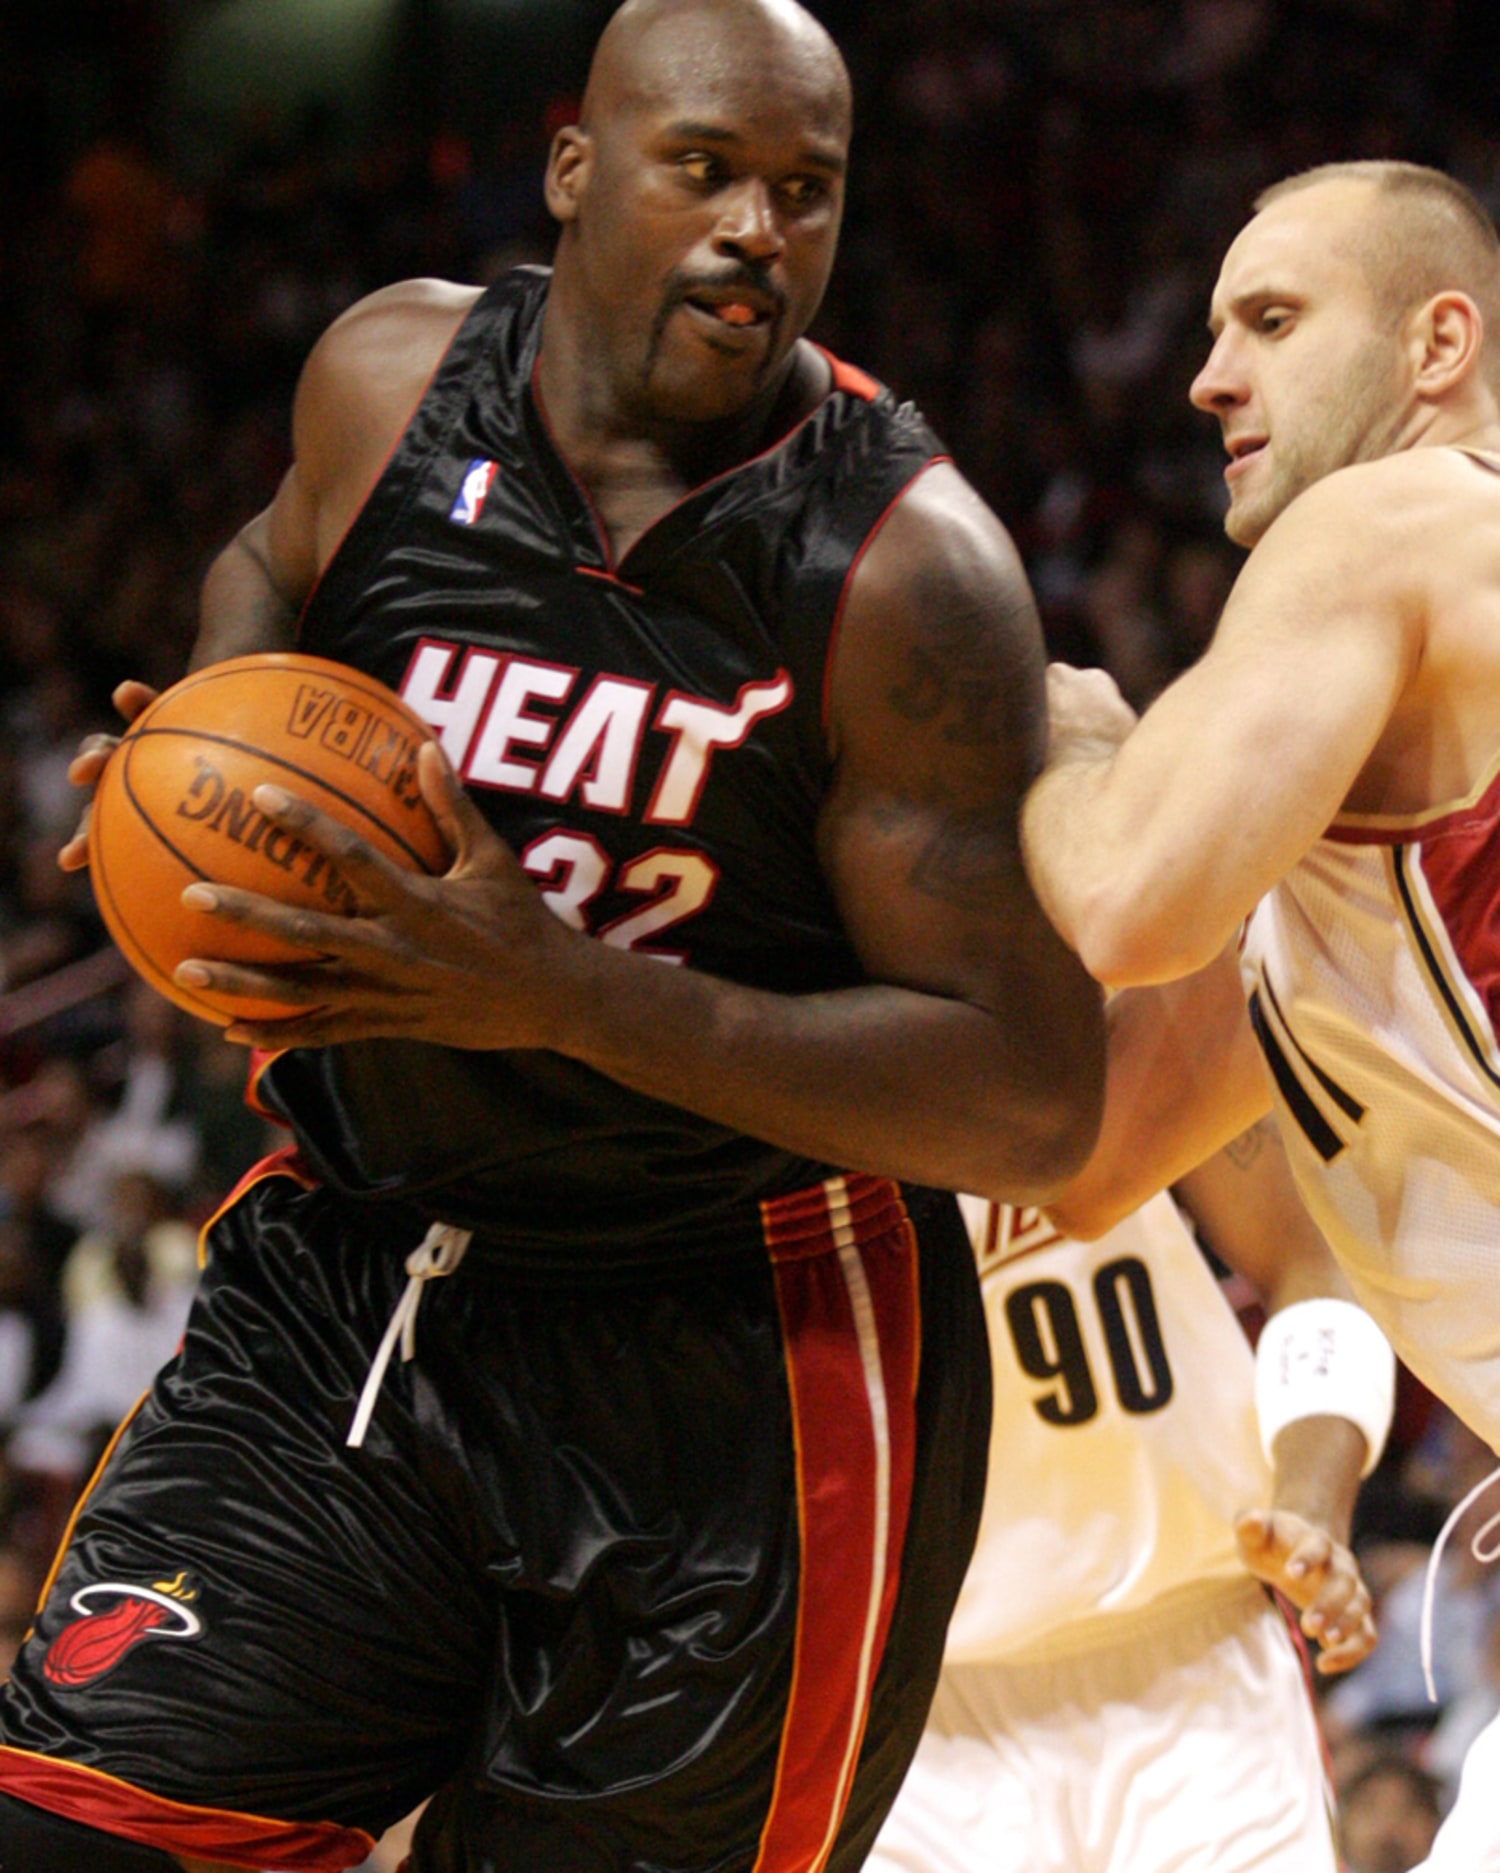 10 Players You Didn't Know Played For The Miami Heat: Penny